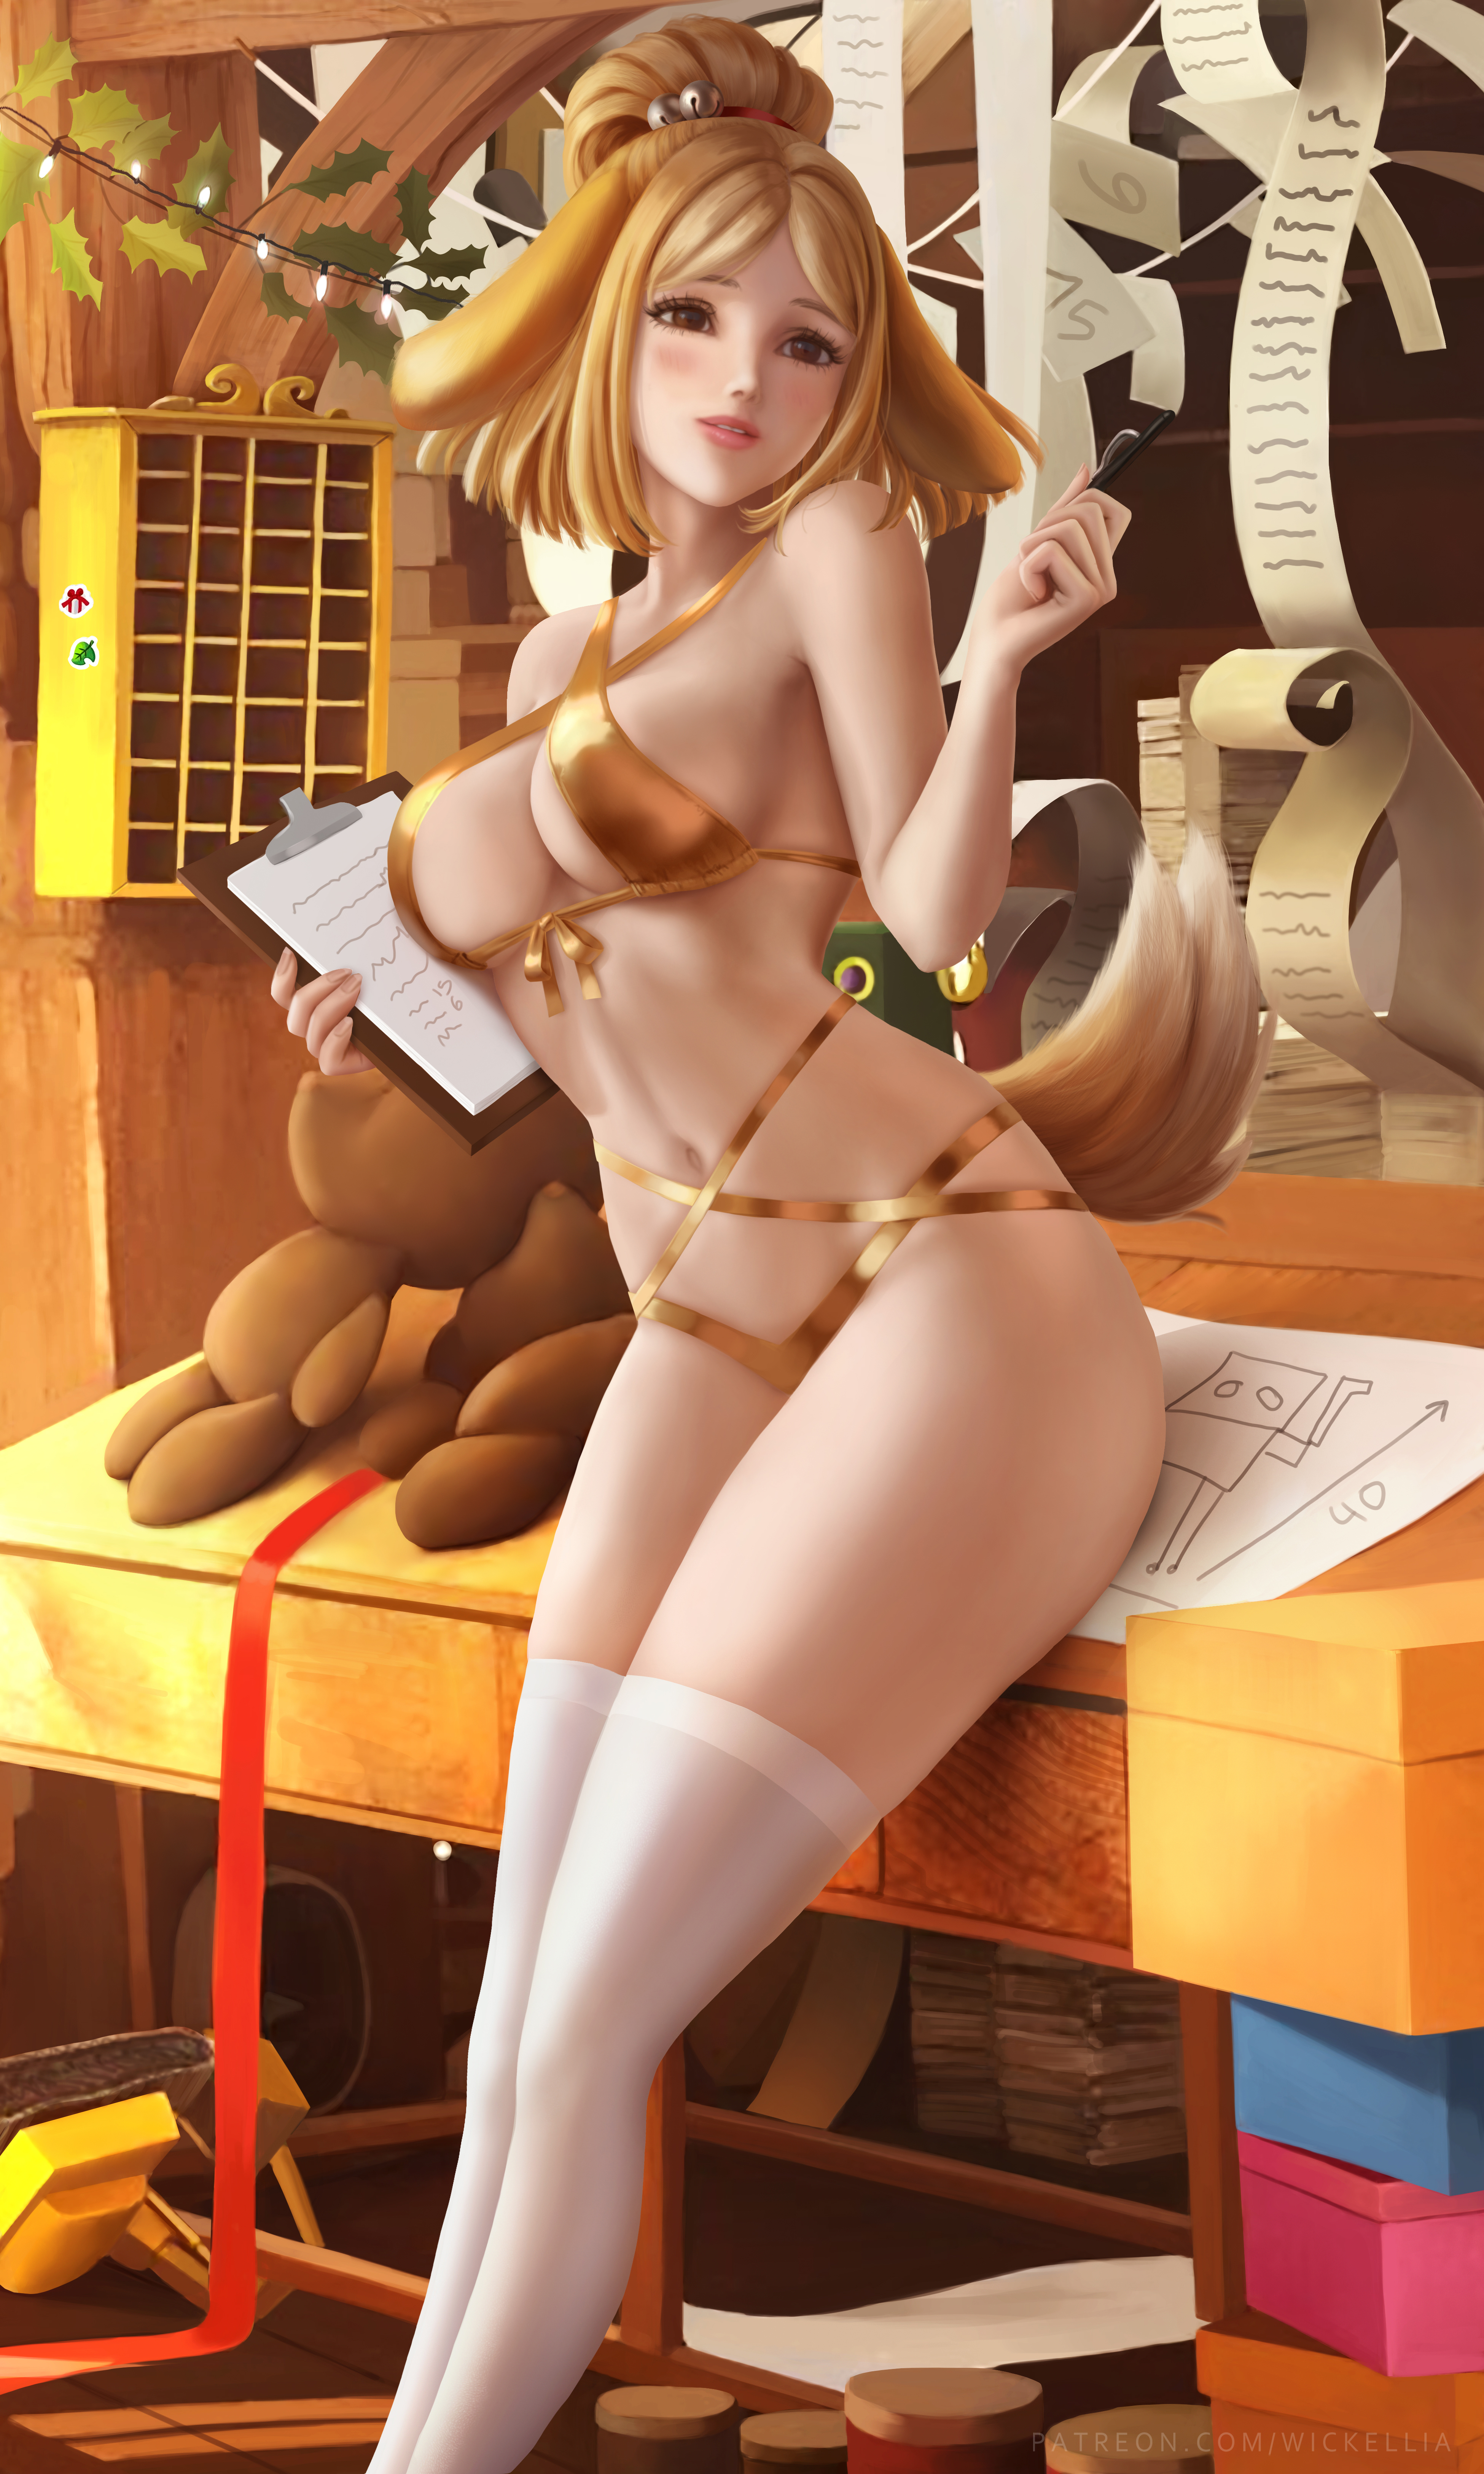 General 3900x6500 illustration artwork digital art fan art drawing fantasy girl fantasy art Wickellia video games video game girls video game art video game characters women Isabelle (Animal Crossing) Animal Crossing Nintendo tail lingerie belly belly button short hair thigh-highs cleavage white stockings